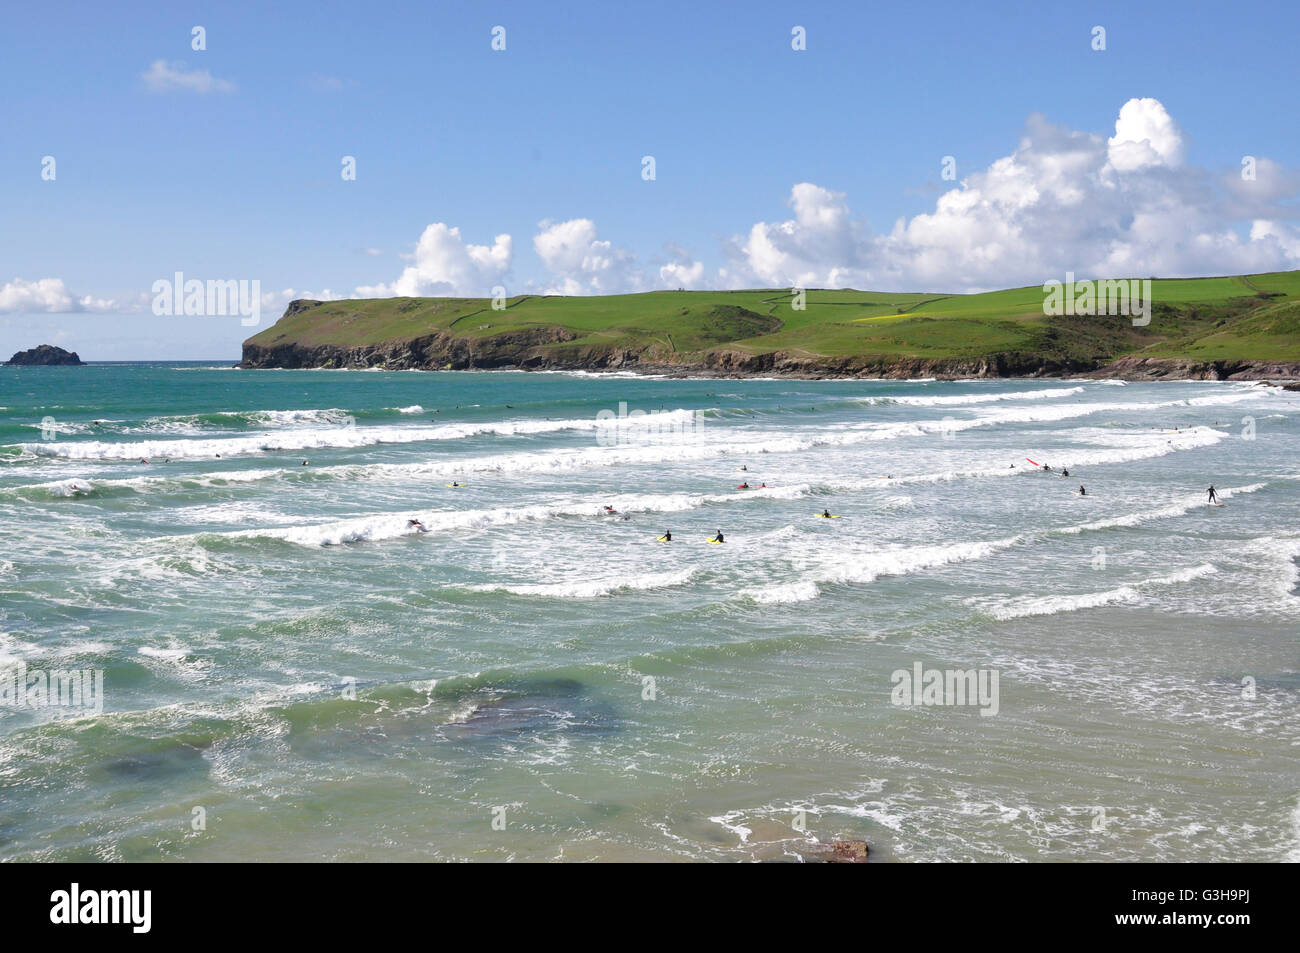 Cornwall - Polzeath beach - surging incoming tide - white capped waves - surfers - backdrop Pentire Head - blue sea and sky Stock Photo